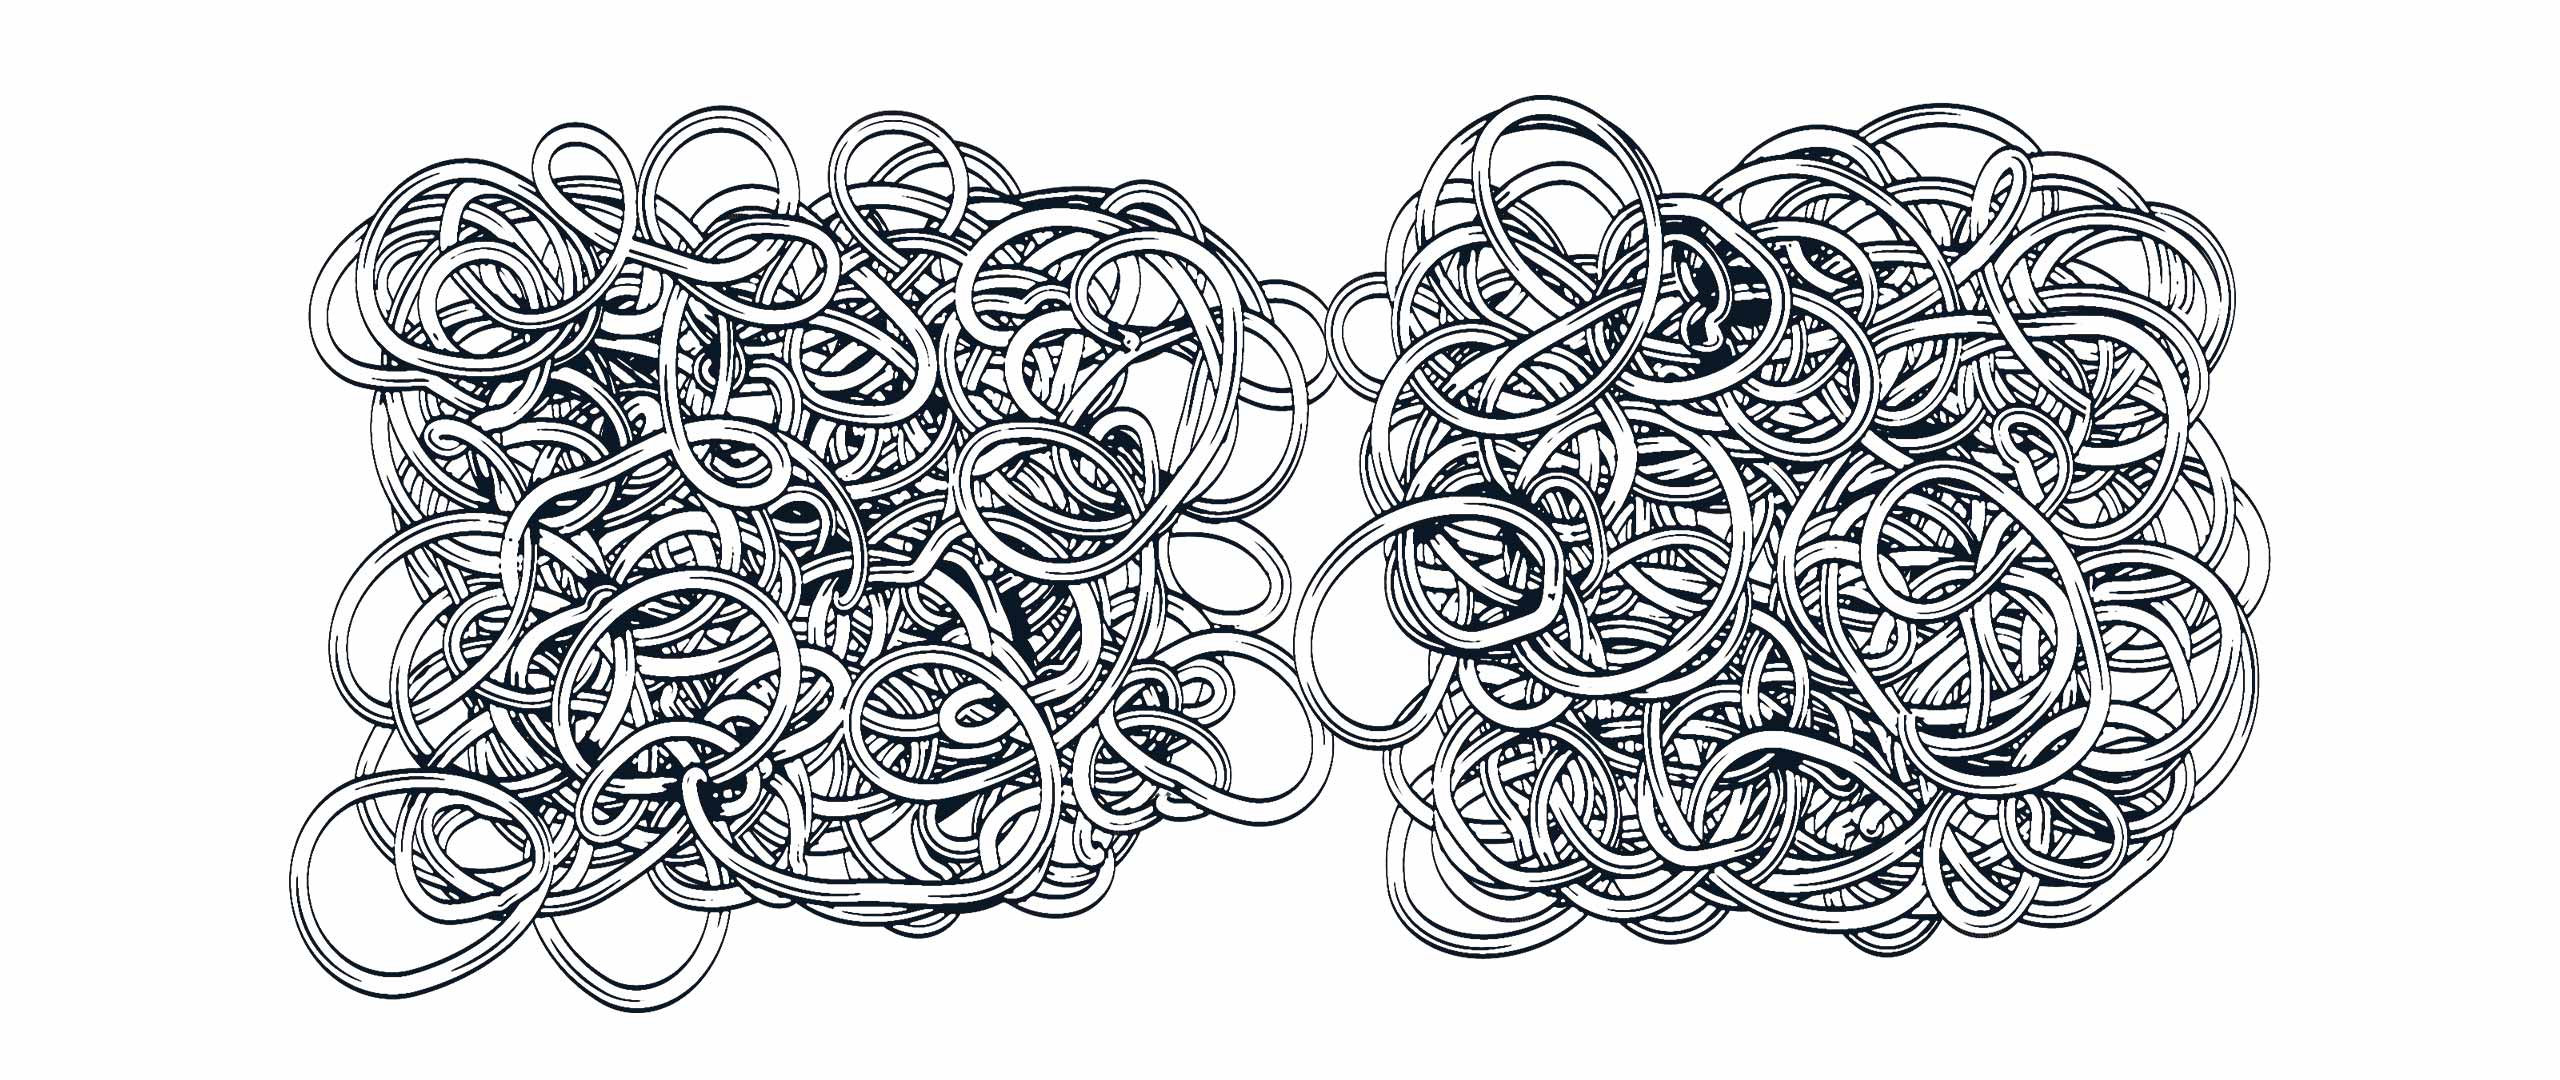 Gordian Knots - Two smaller variations